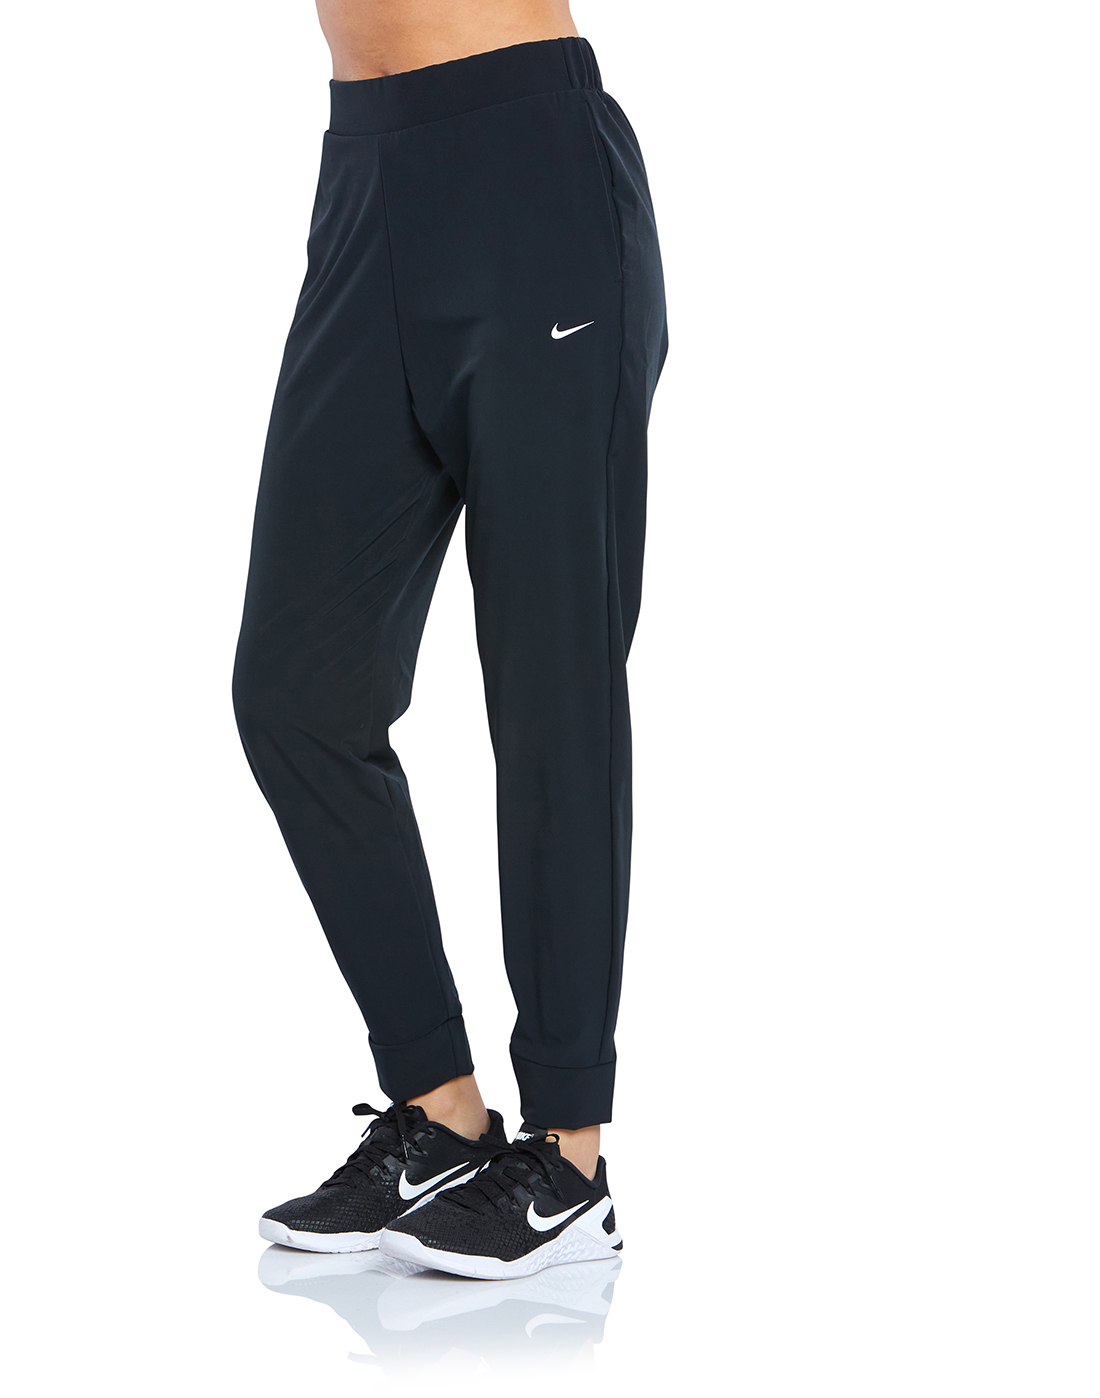 Nike Womens Victory Pant - Black | Life Style Sports IE